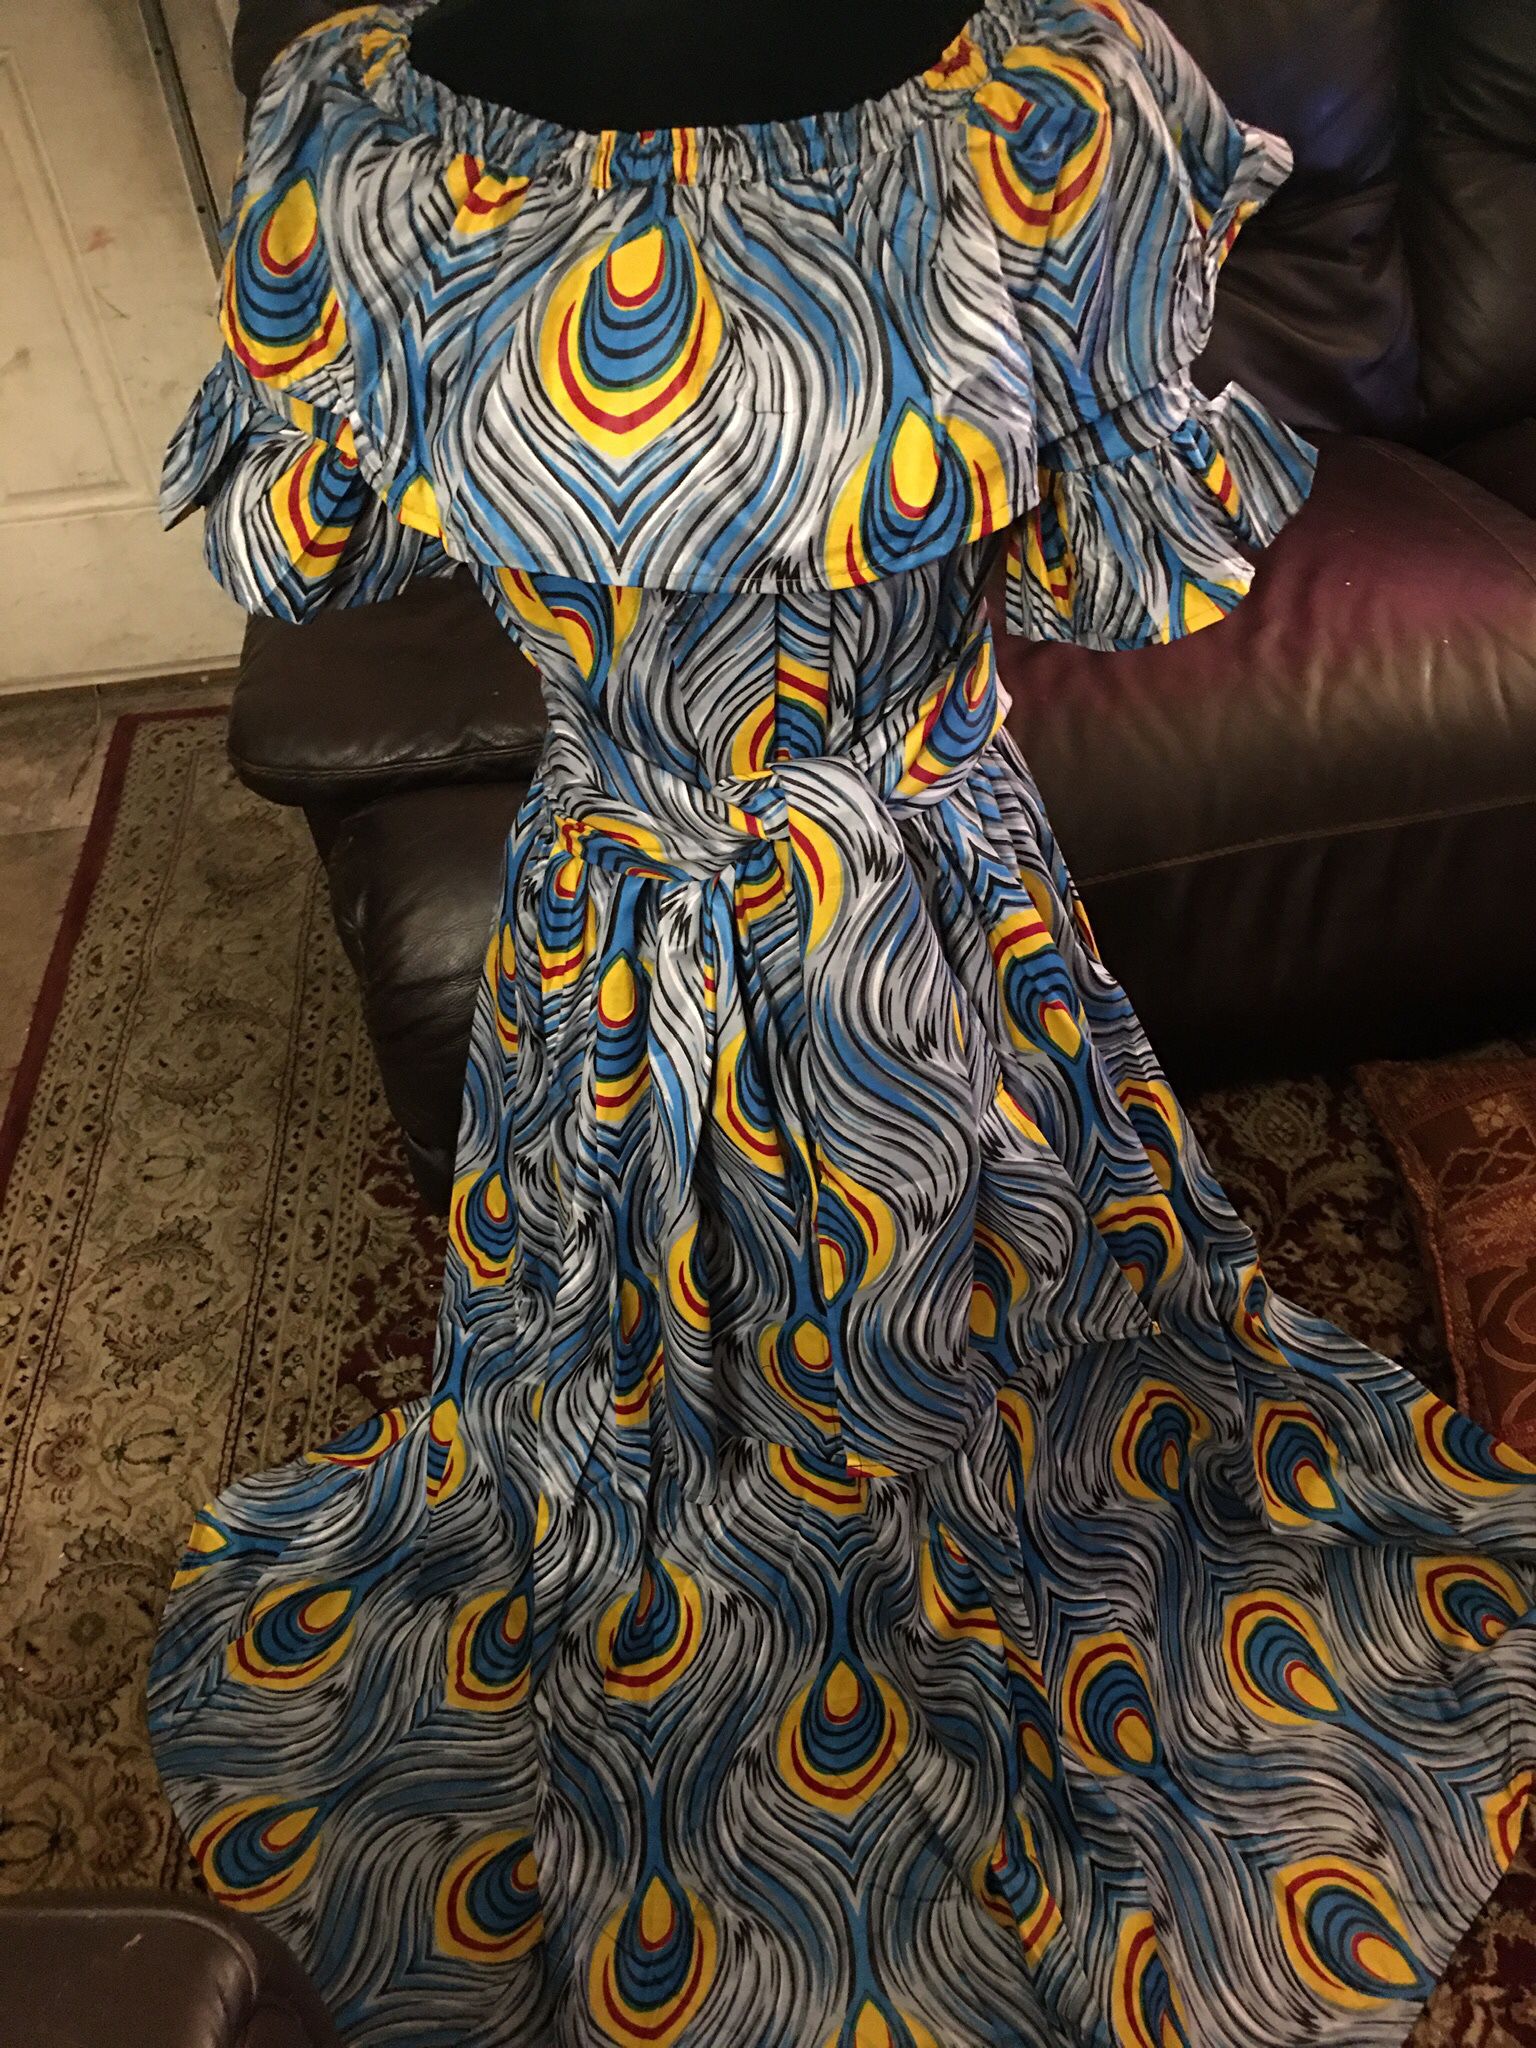 Africain  Dress  Bleu &yellow New One Size Fit All